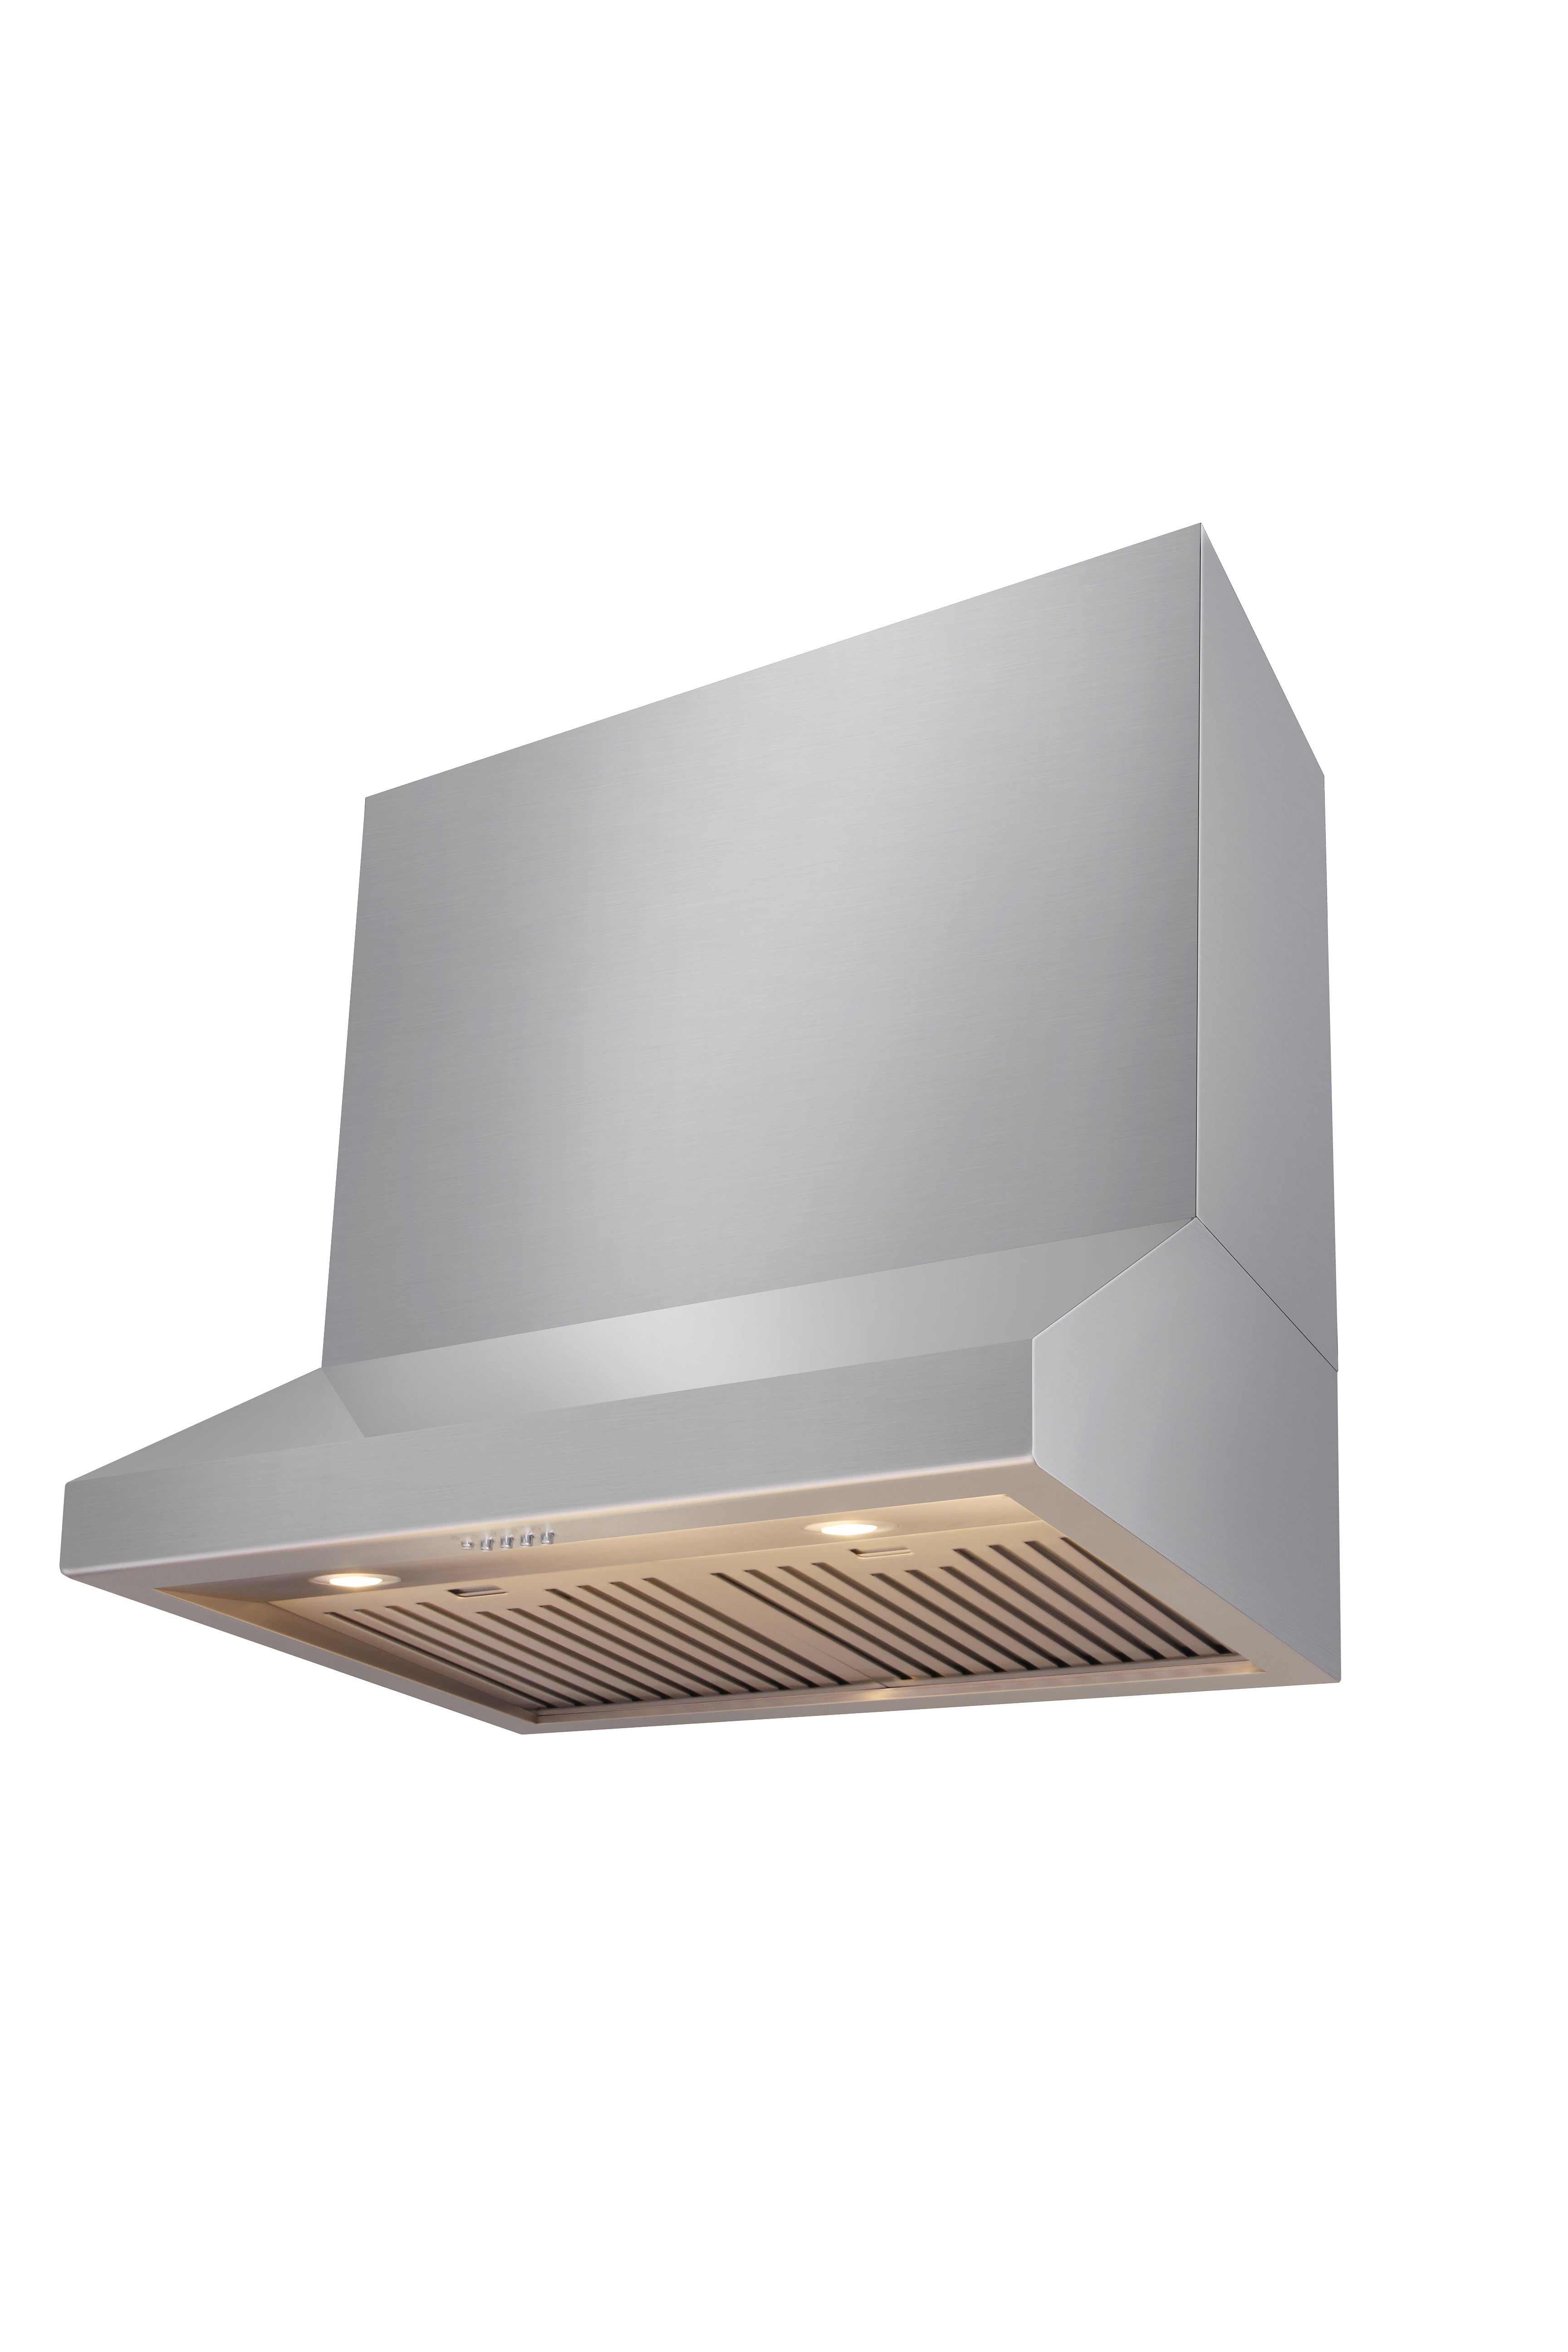 30 Inch Professional Range Hood, 11 Inches Tall in Stainless Steel - THOR  Kitchen